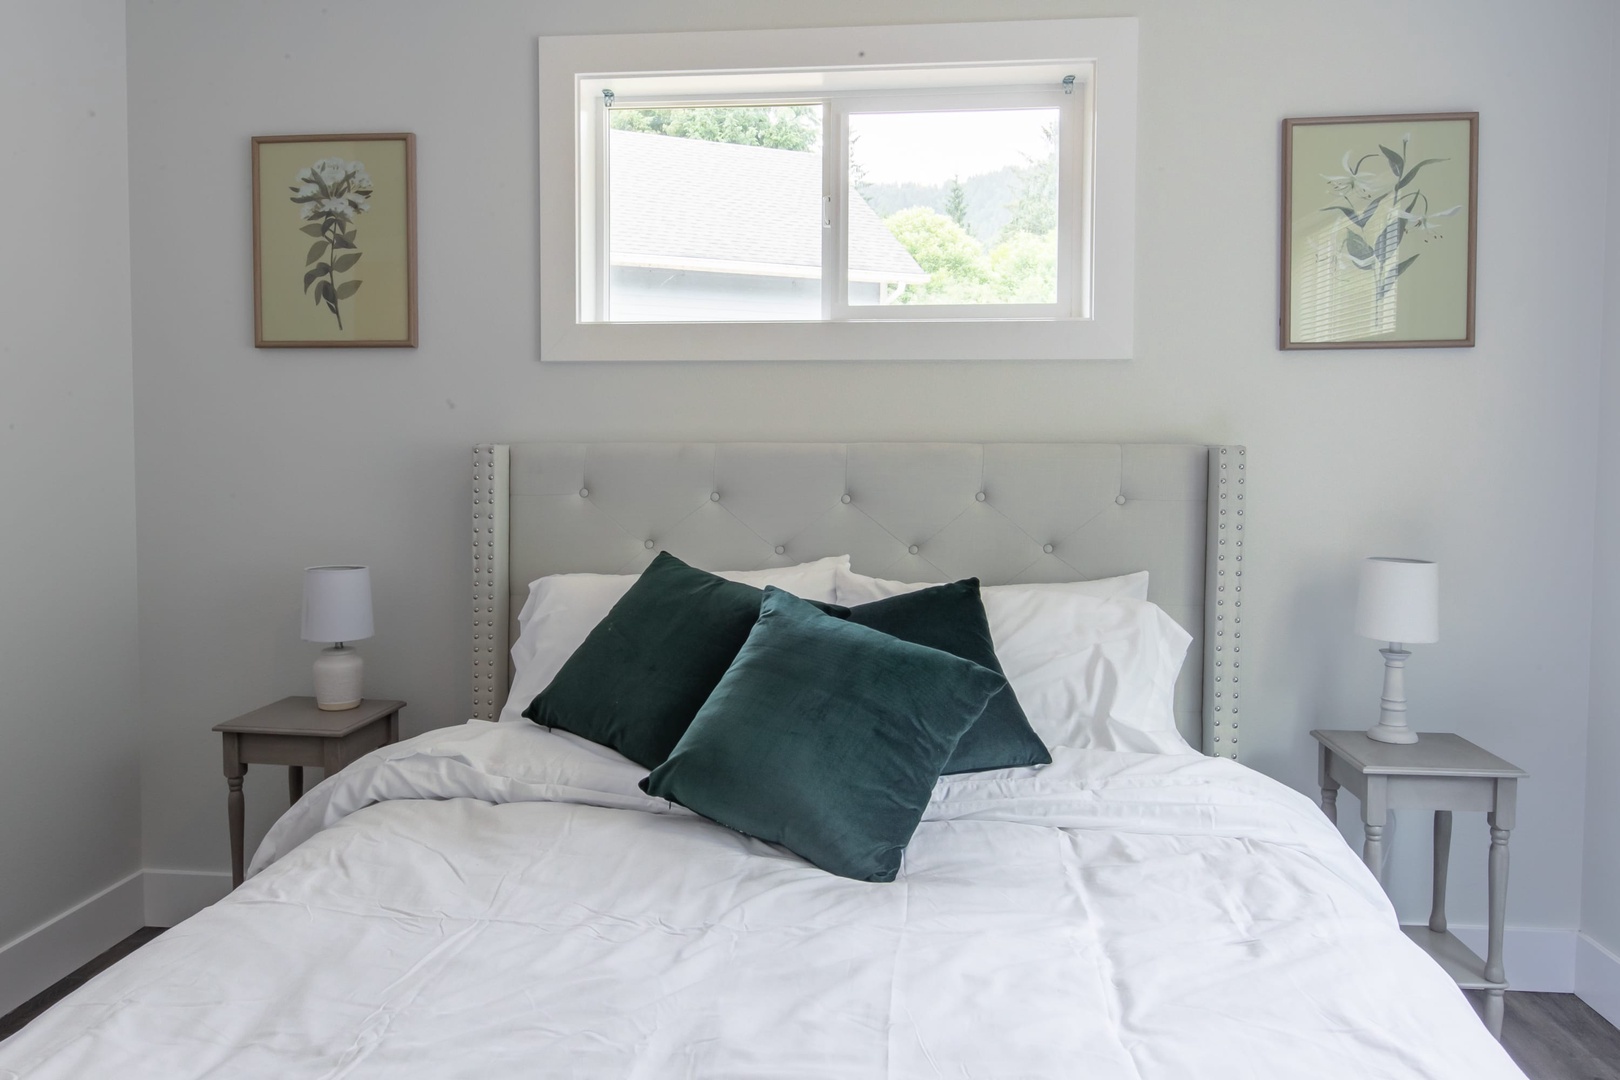 Nehalem Vacation Rentals, Nehalem Coastal Oasis - The primary bedroom also comes with a private ensuite